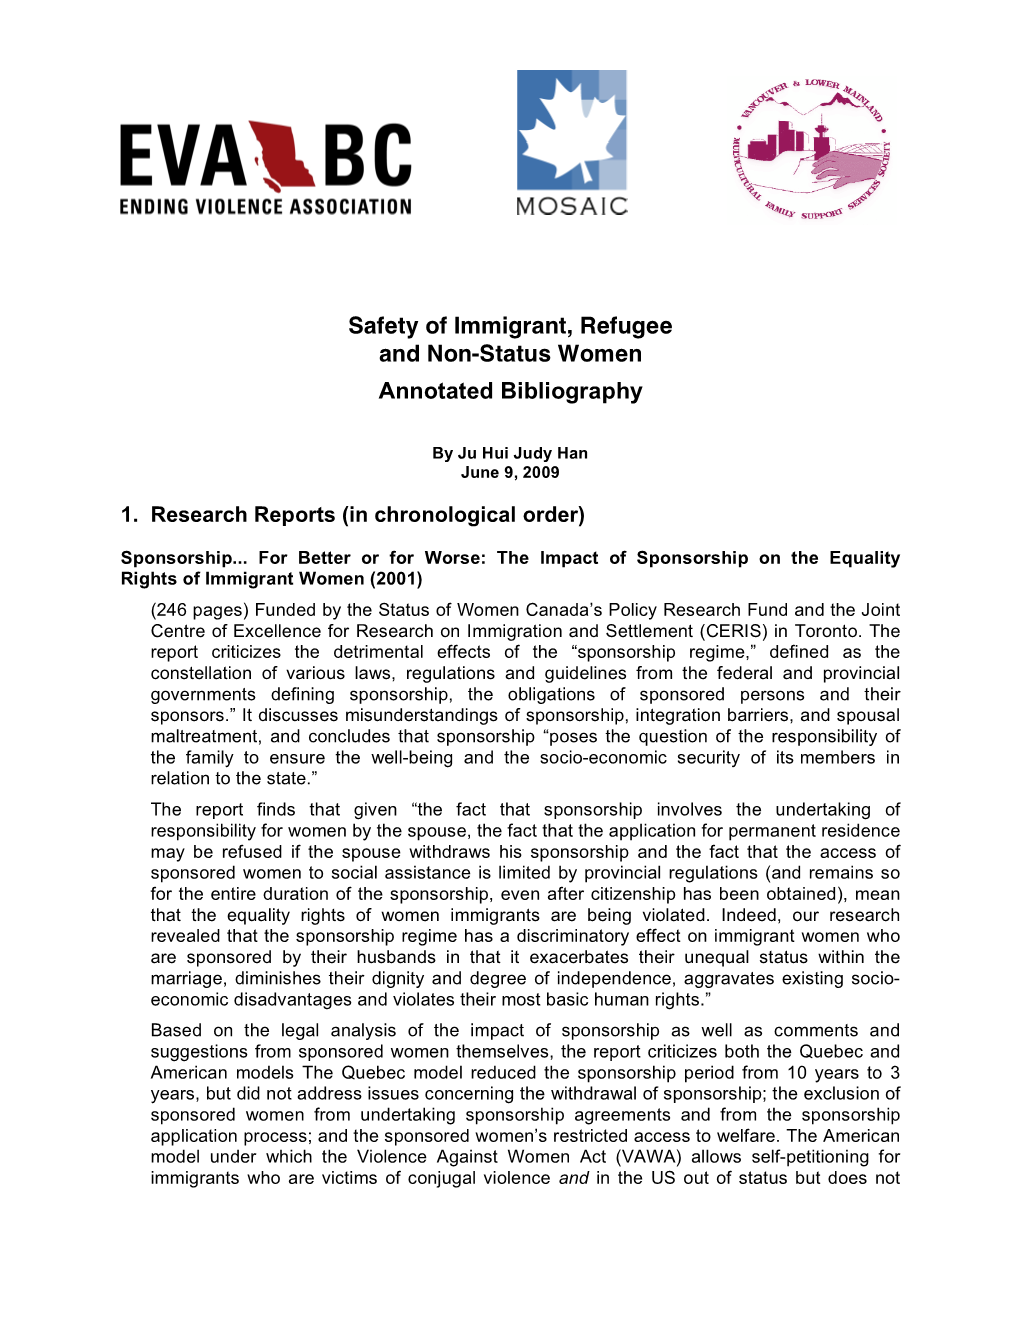 Safety of Immigrant, Refugee and Non-Status Women Annotated Bibliography